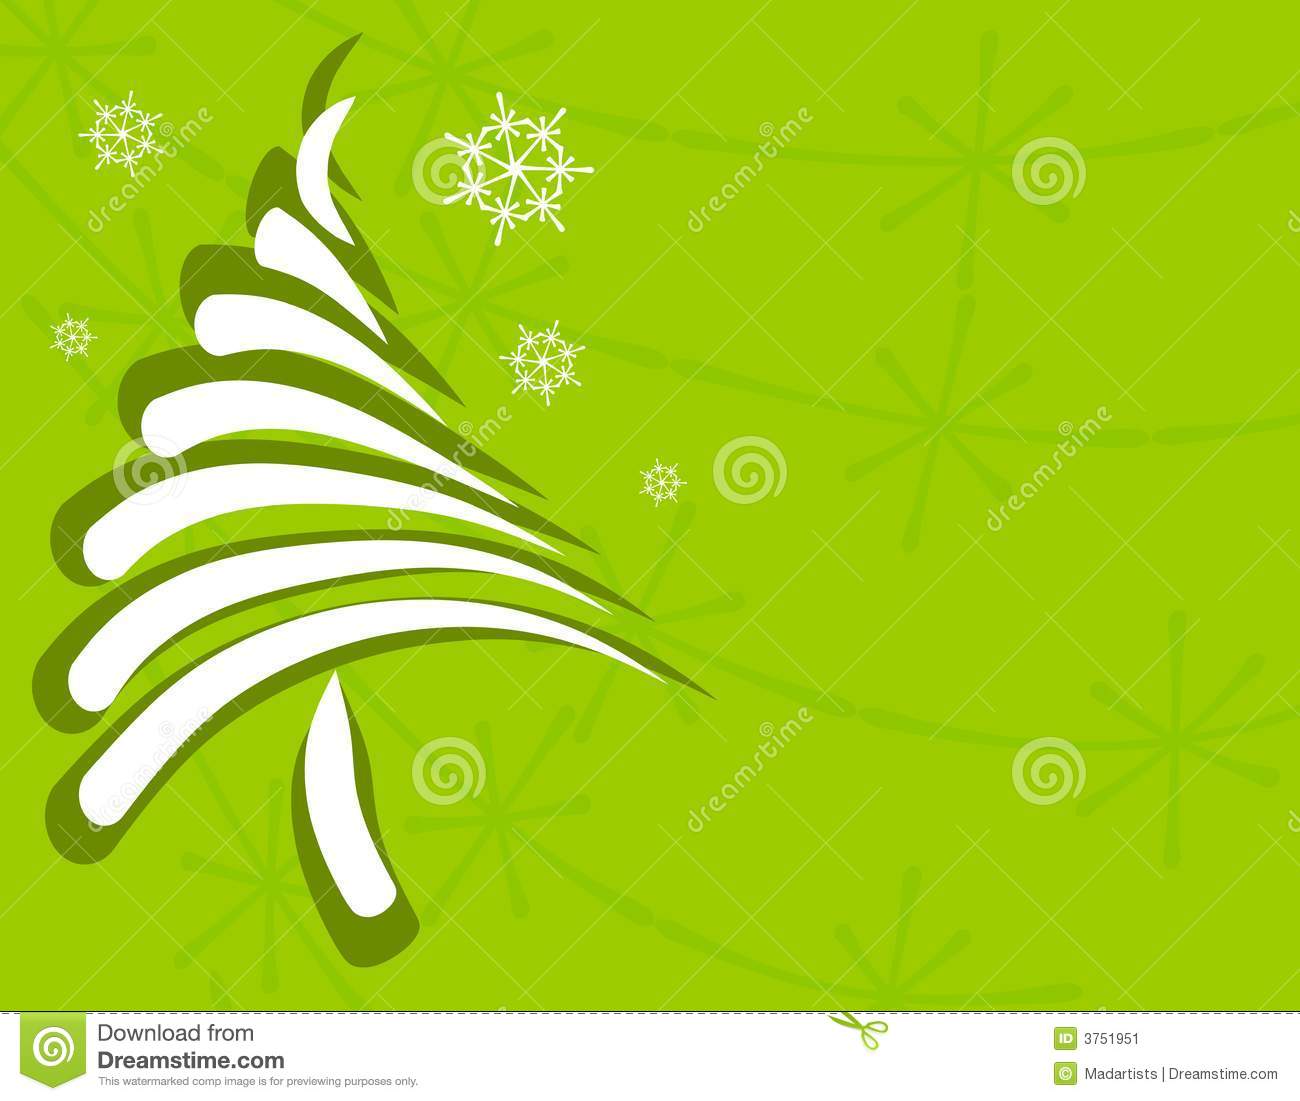 Clip Art Illustration Featuring A Unique Looking Christmas Tree Made